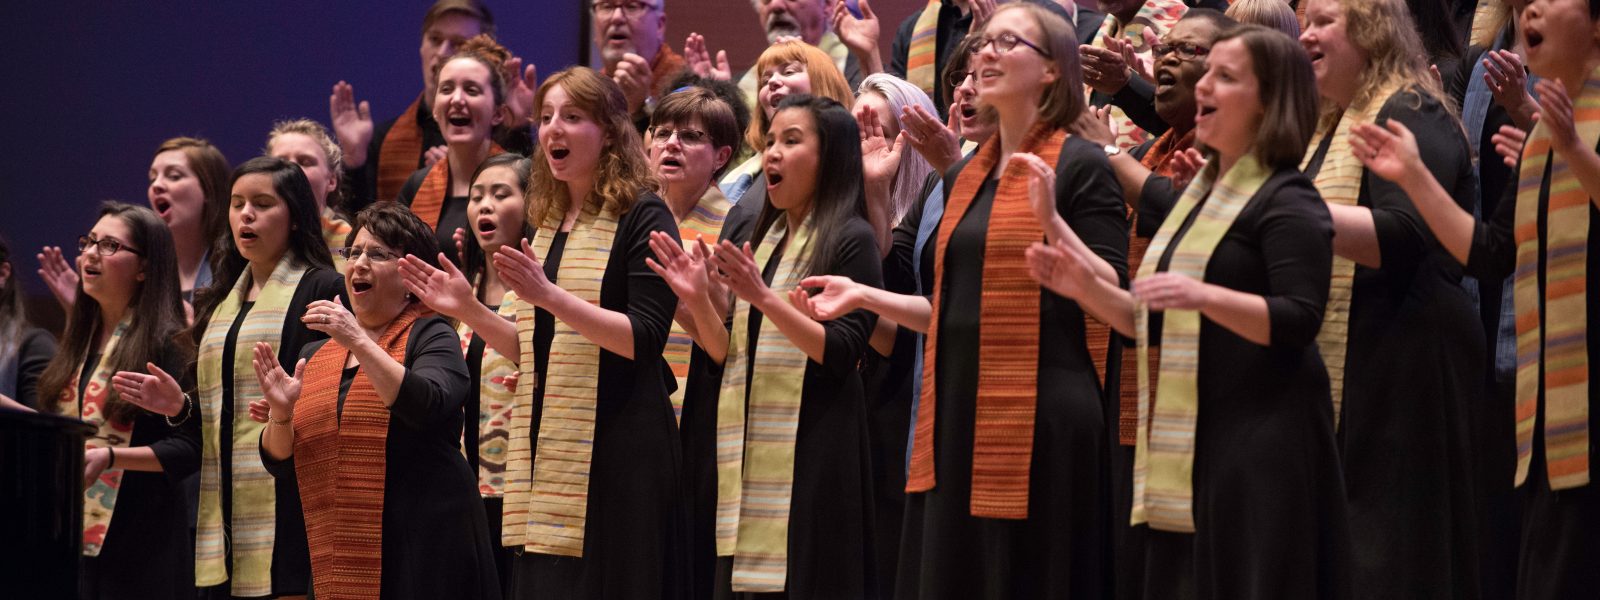 VocalEssence Singers wearing stoles and clapping their hands. Photo Credit: Bruce Silcox